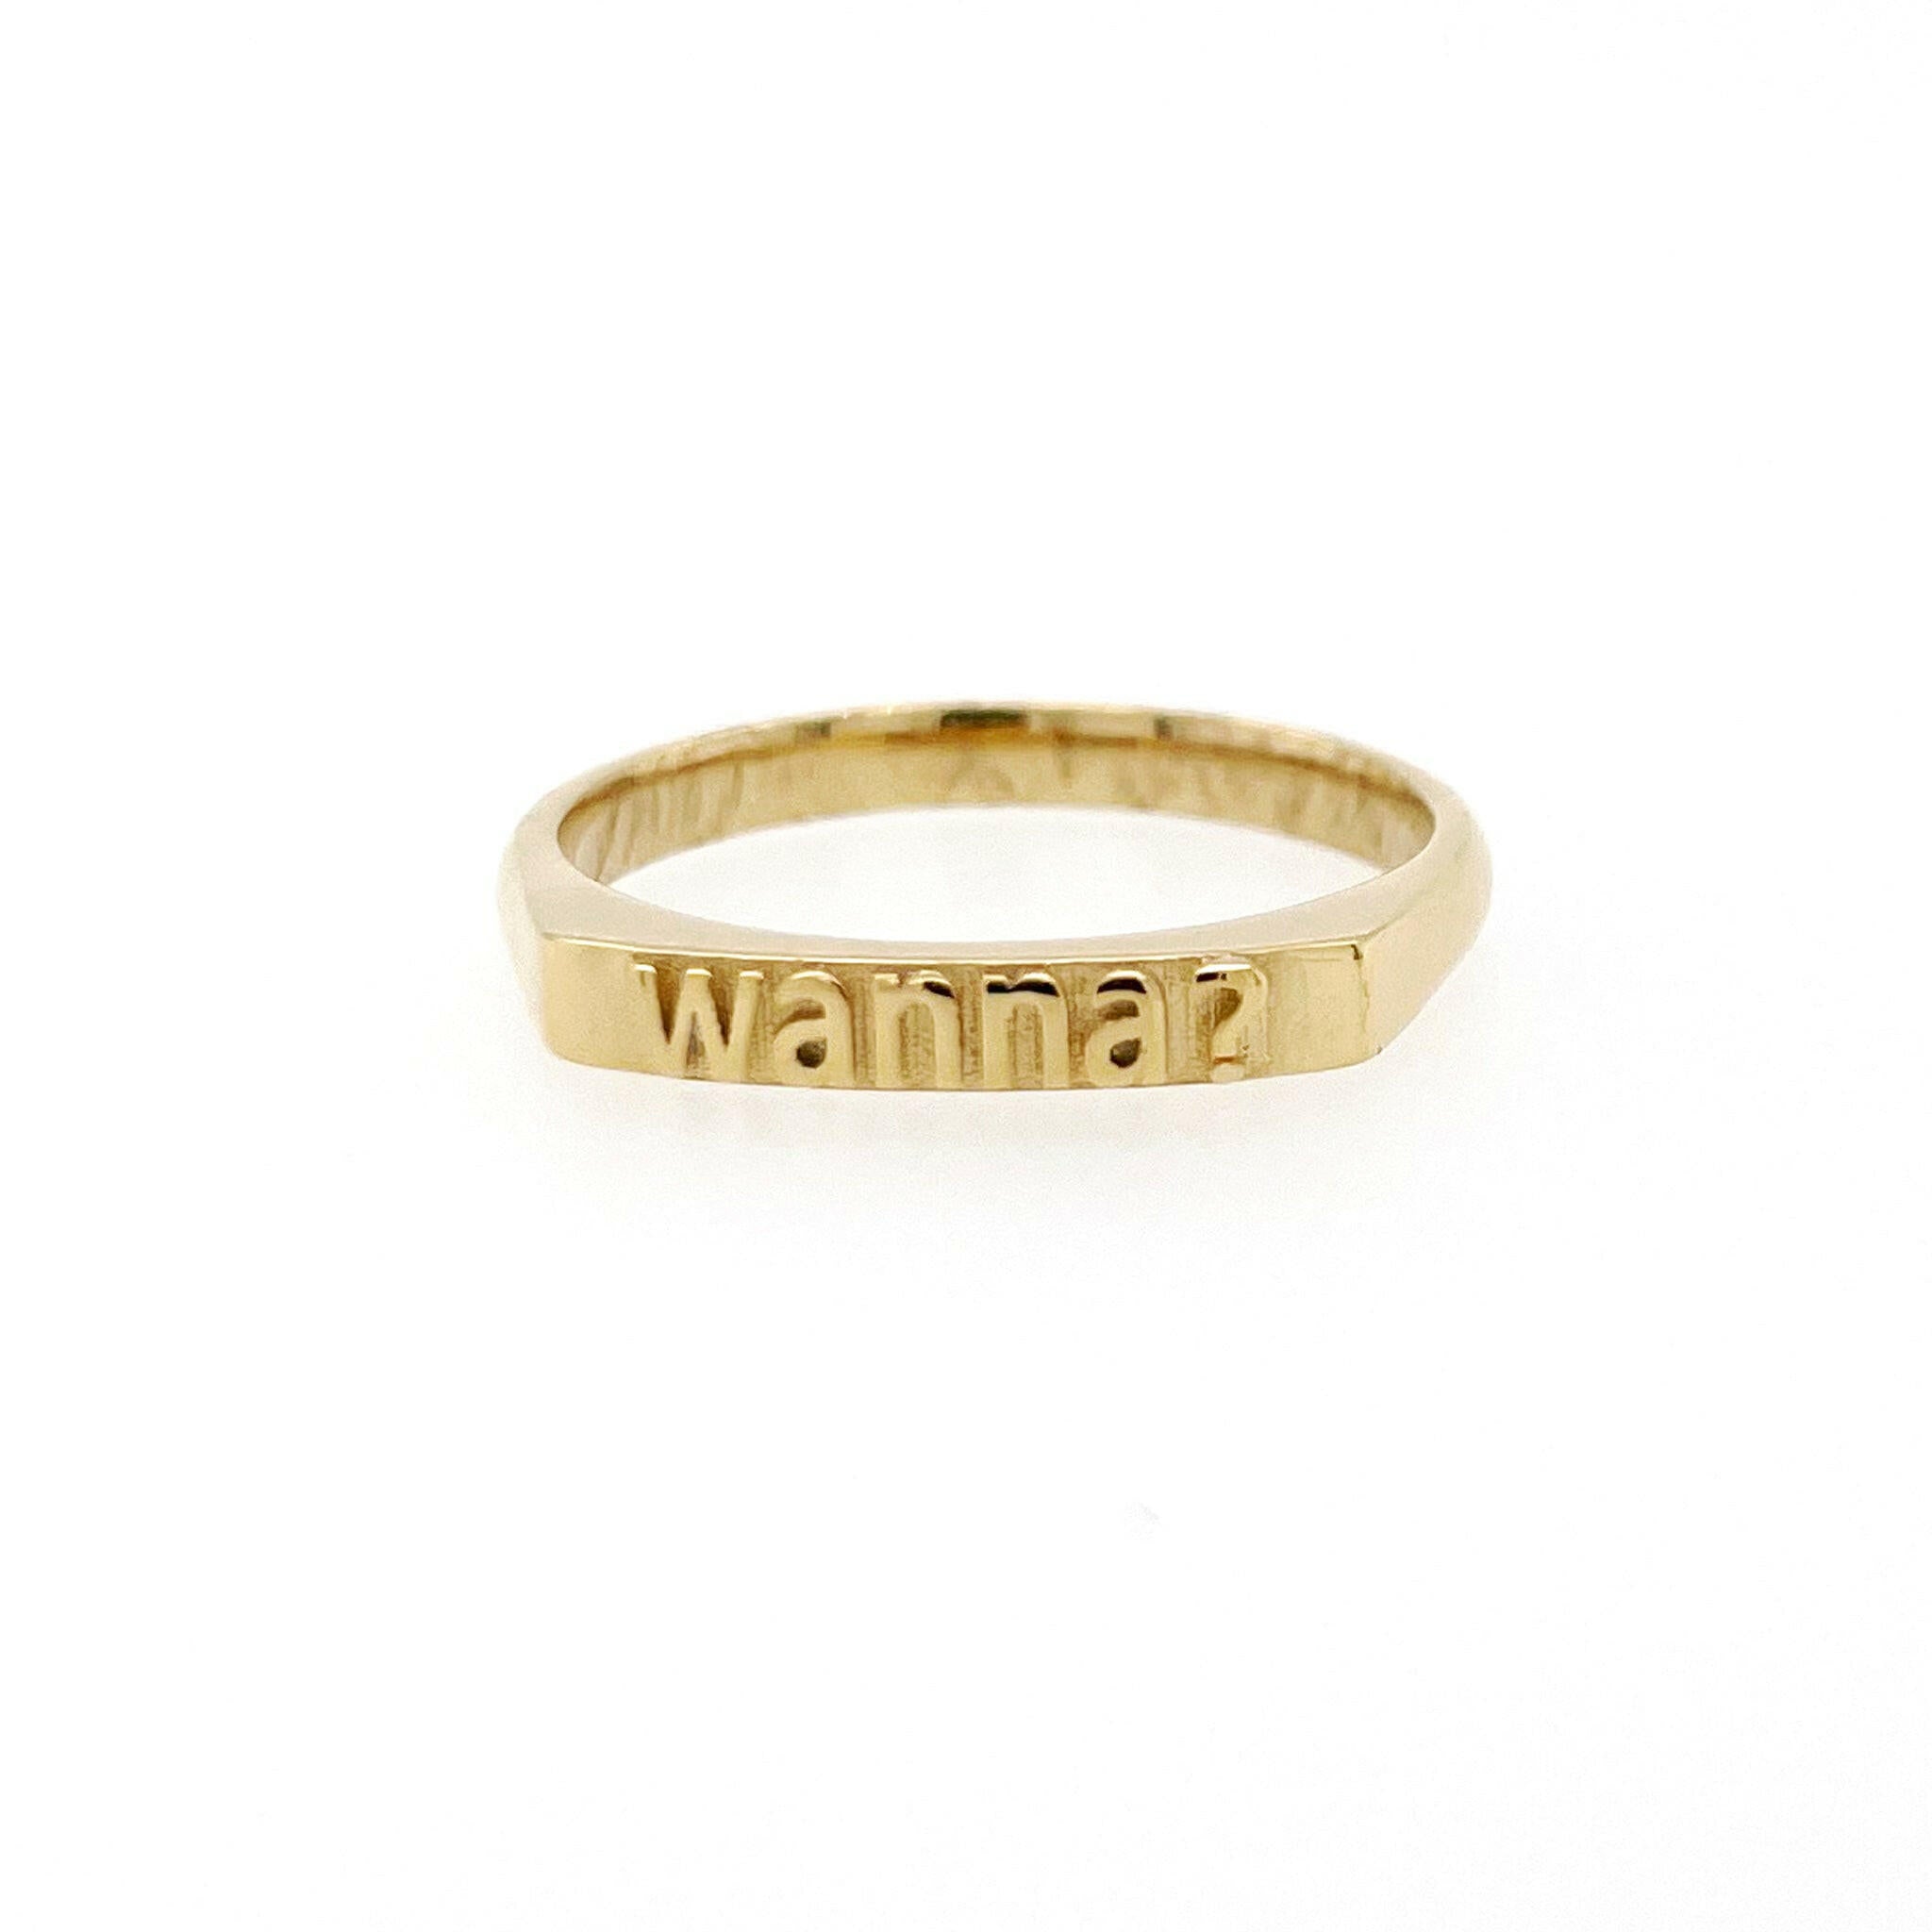 front view of 14 karat yellow gold ring with text that reads "wanna?"